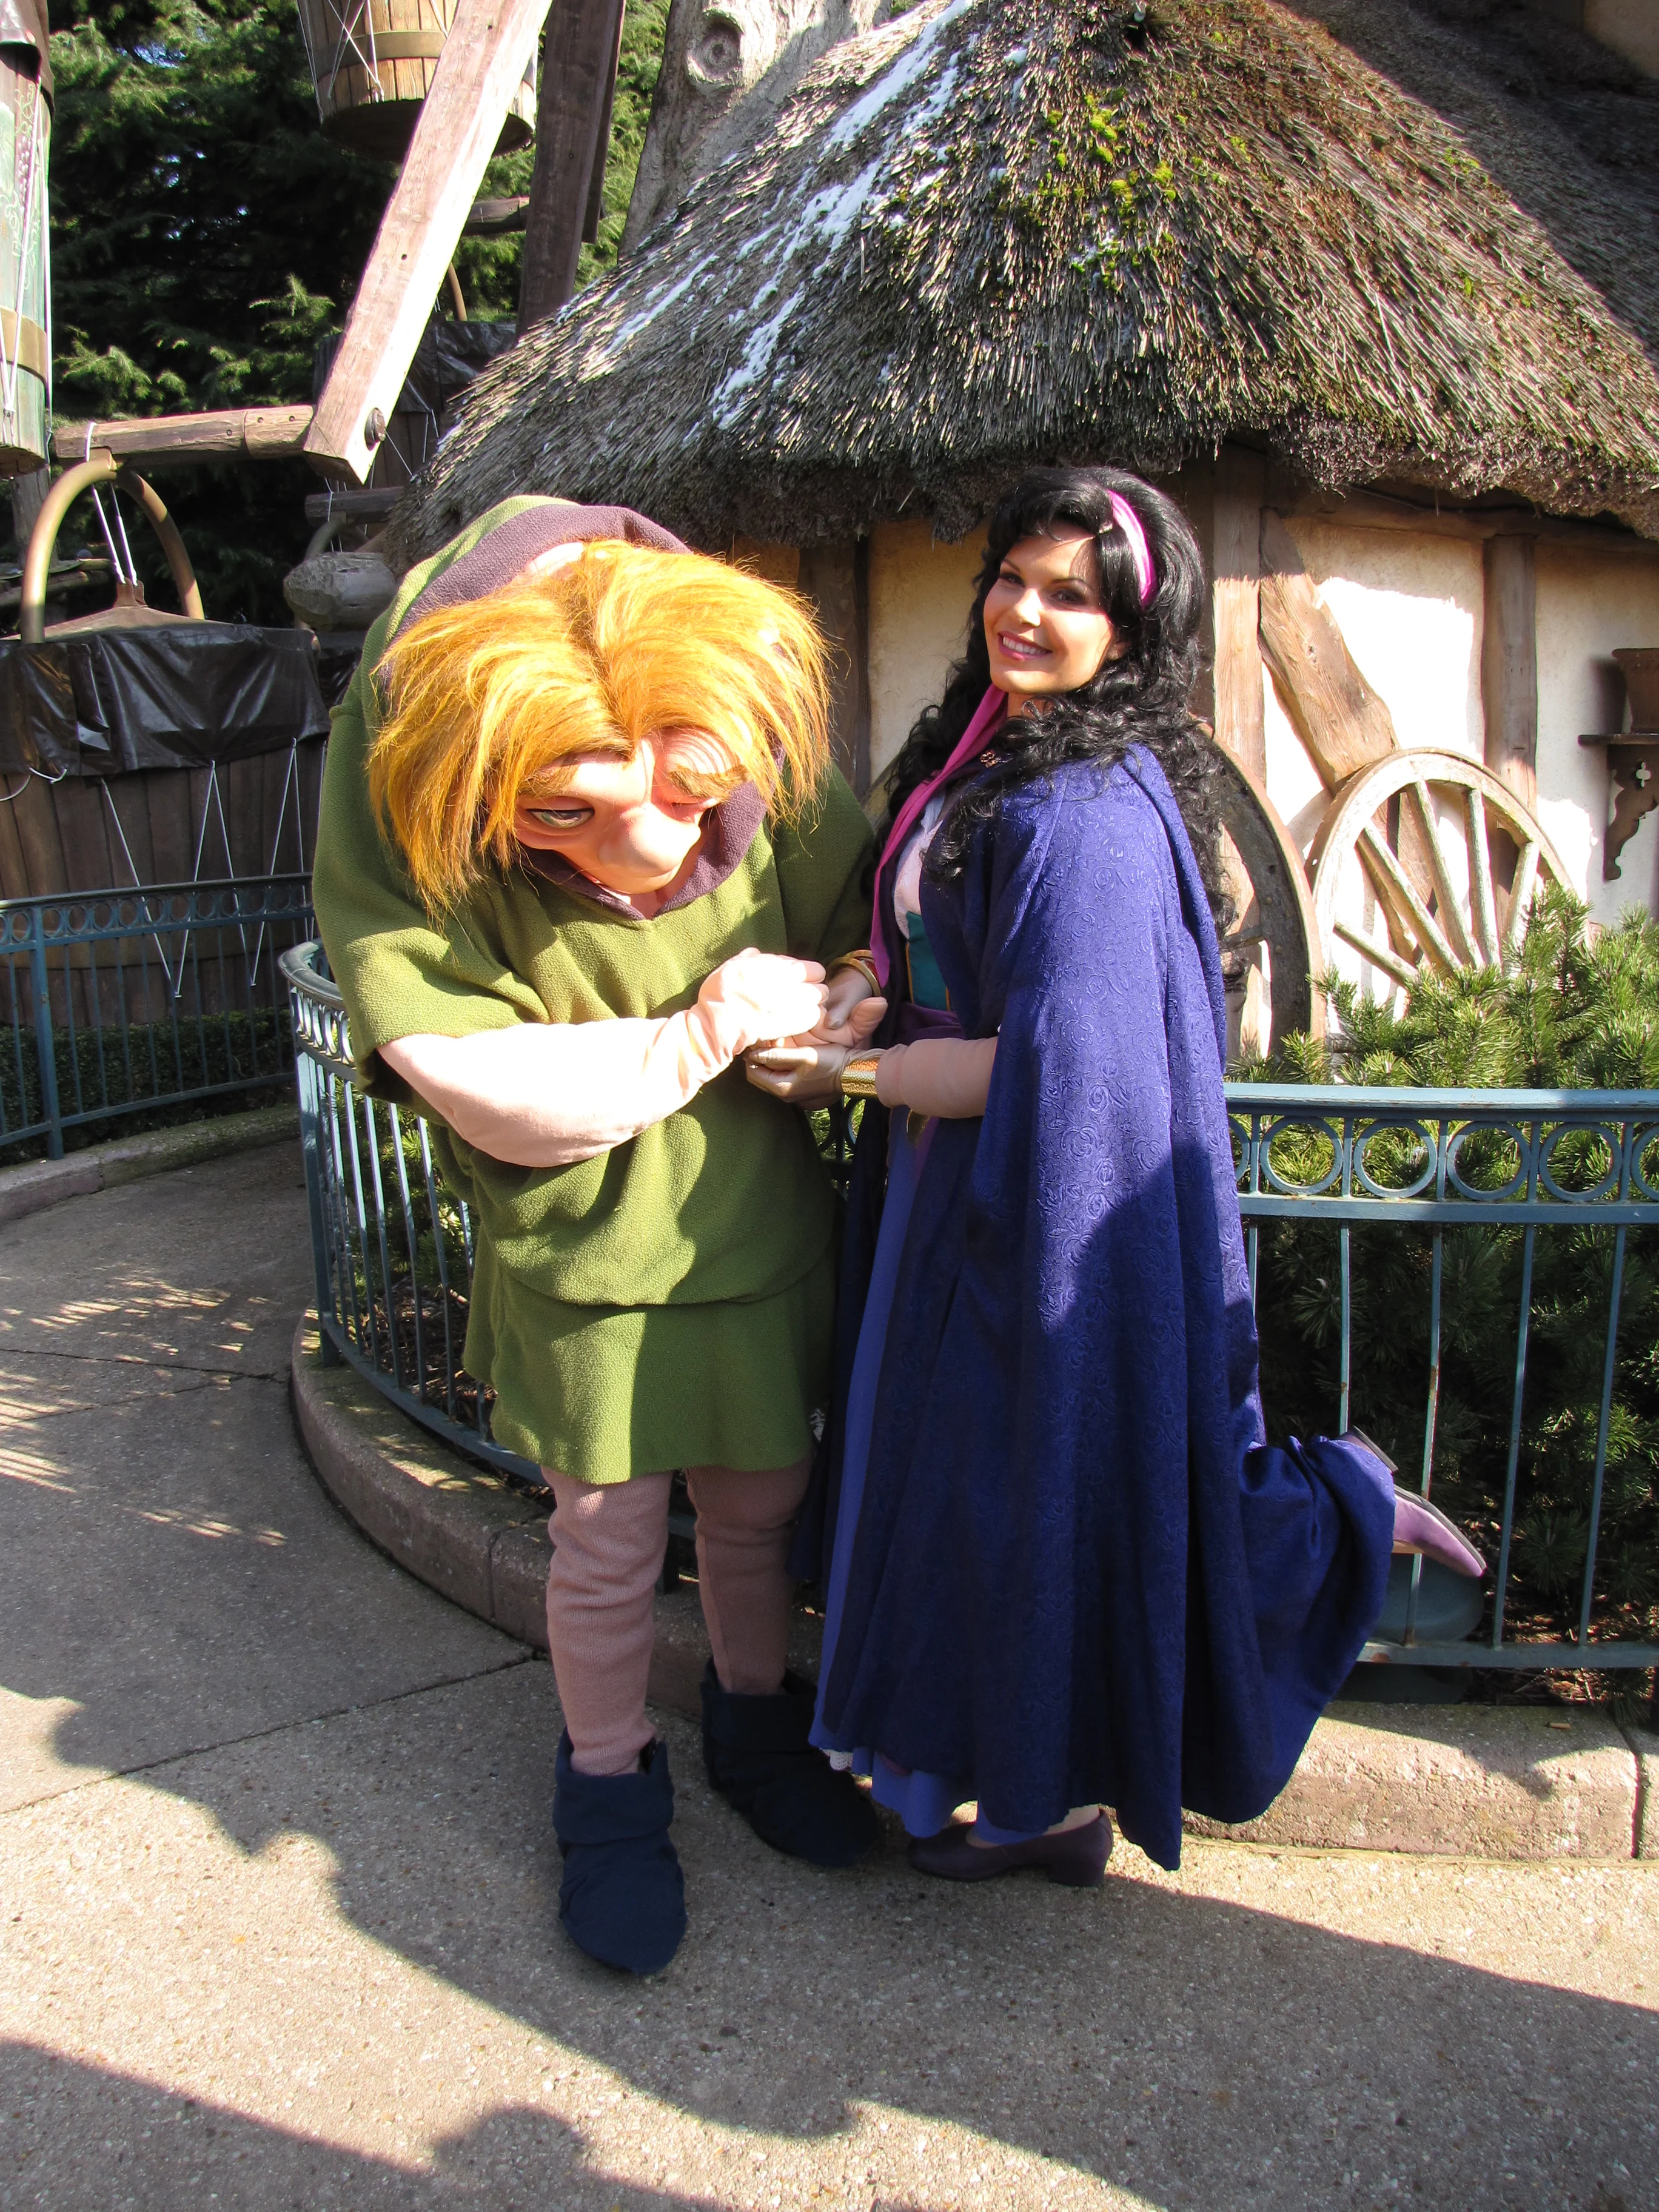 Esmeralda & Quasimodo did Meet'n'Greets on Valentine Day in 2010. Quasimodo can't be found in the Parks normally